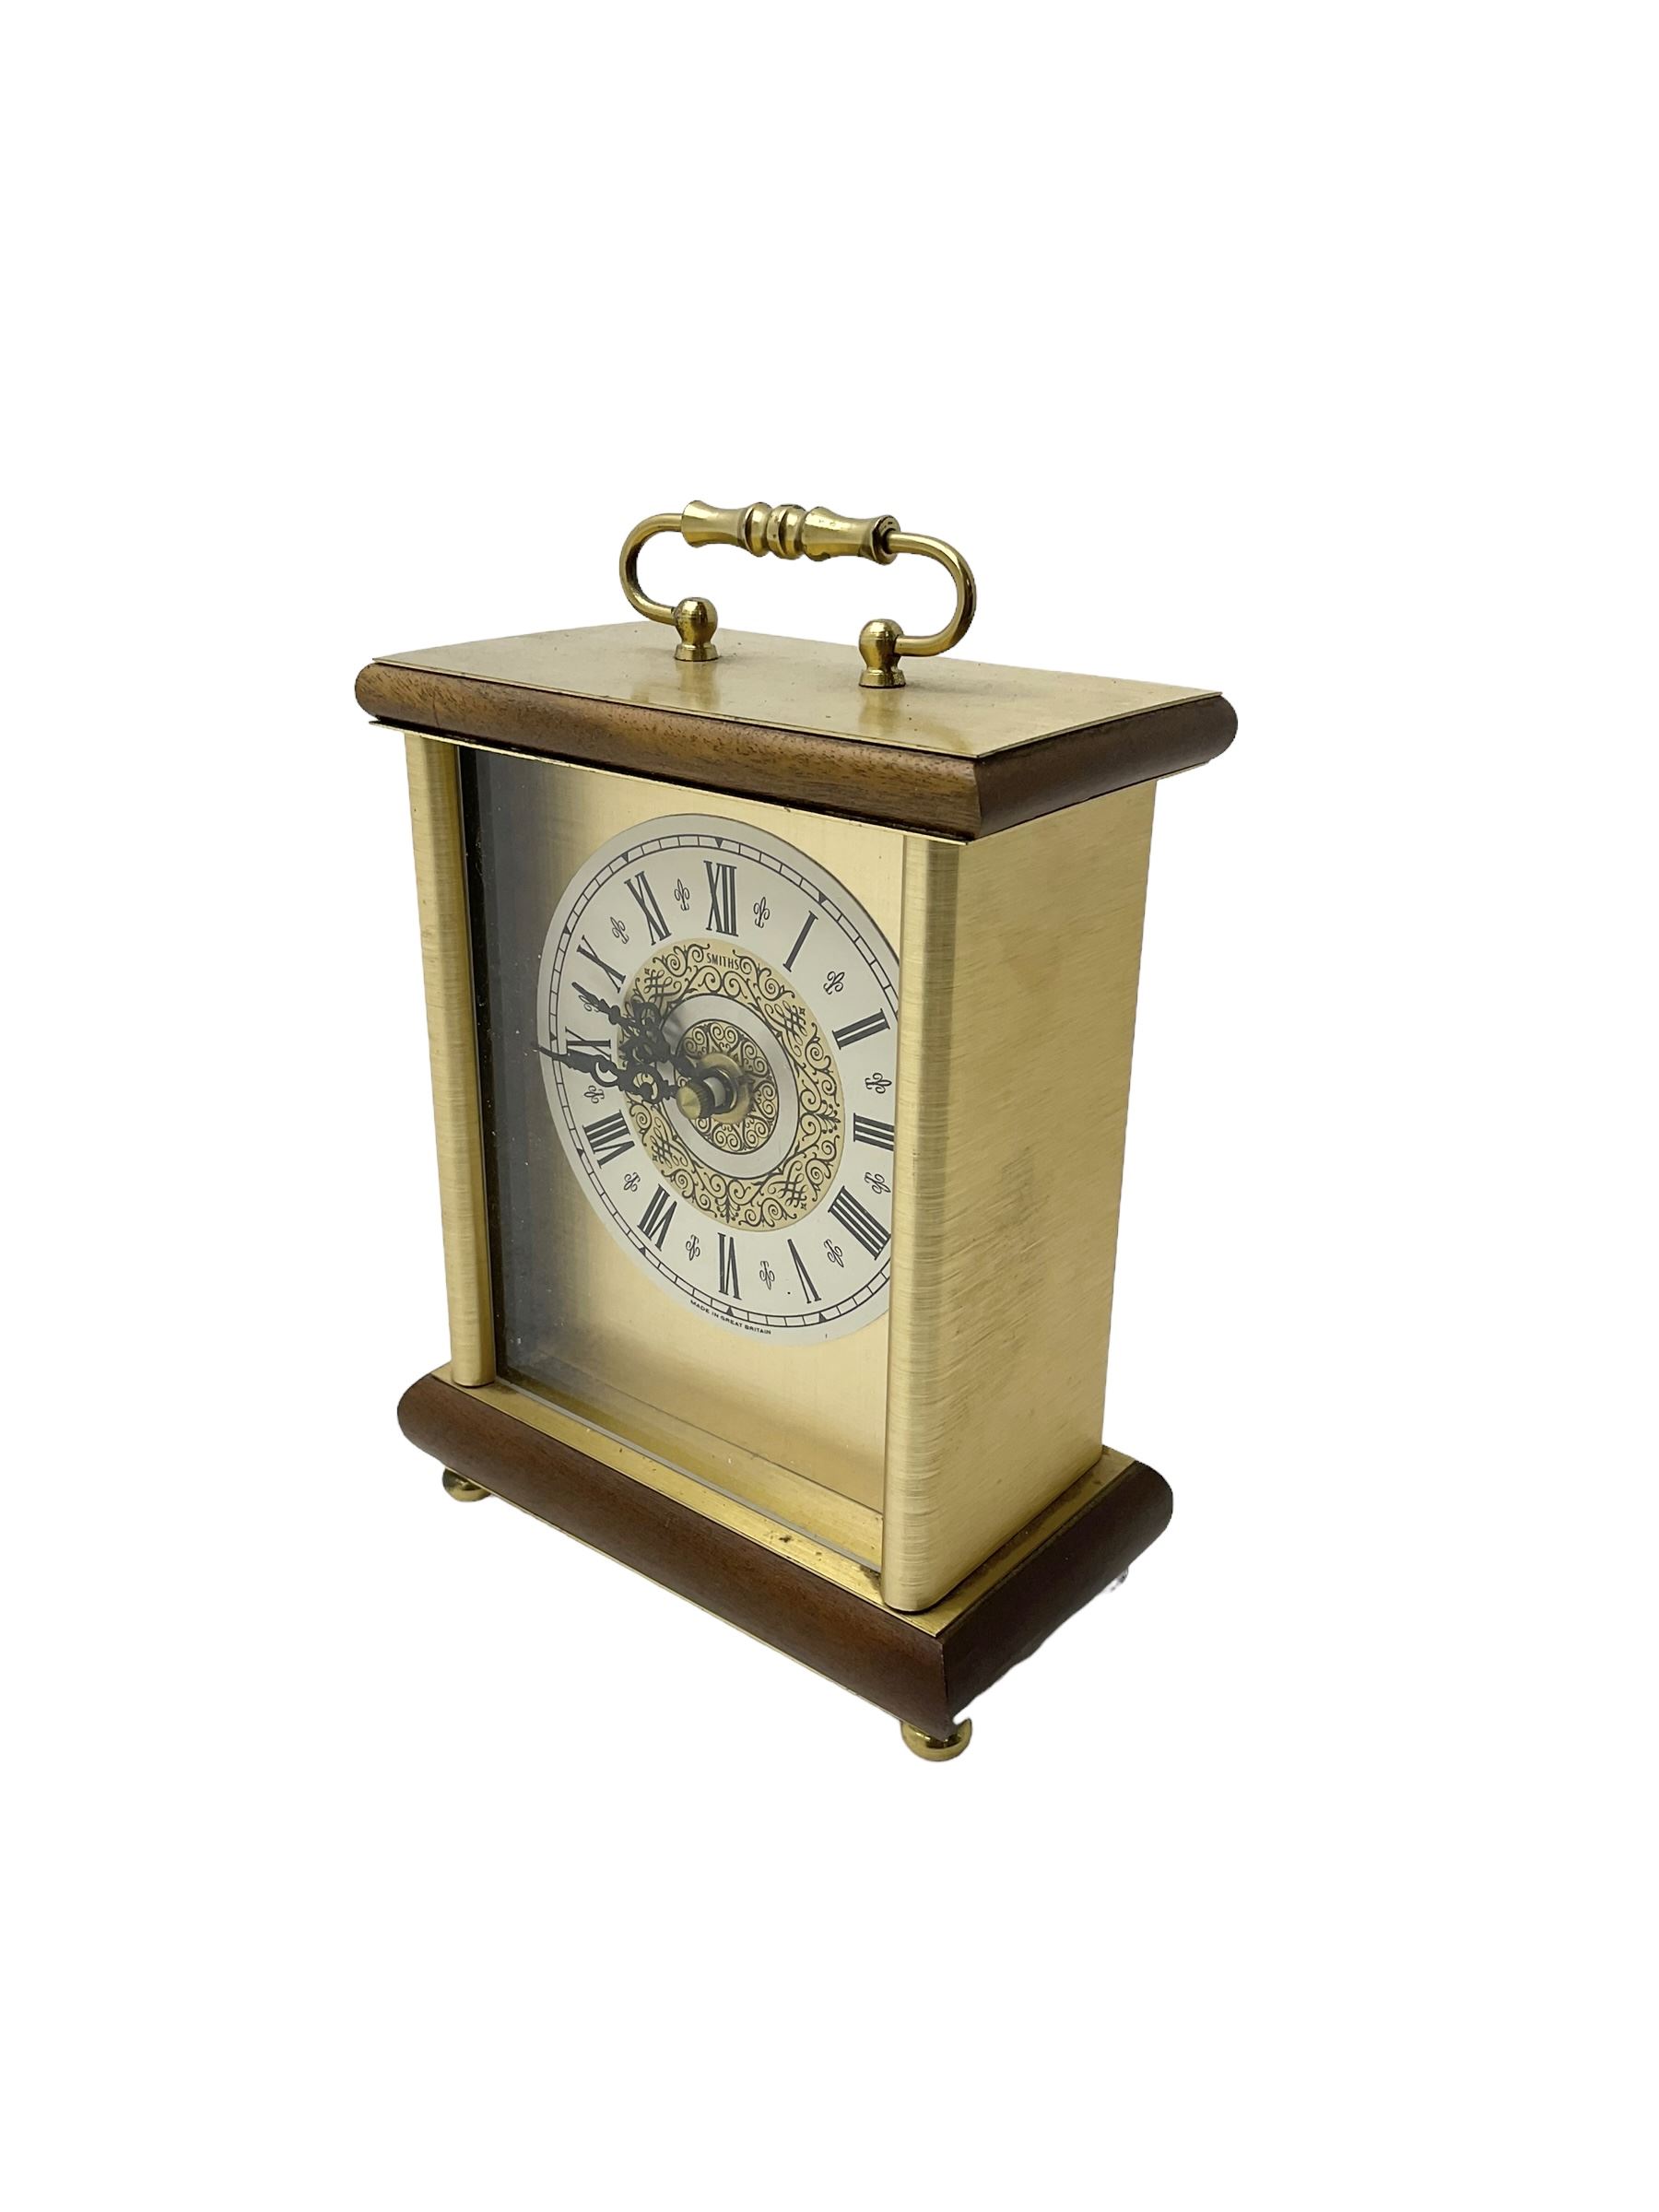 Smiths 20th century battery operated mantle clock - Image 2 of 2